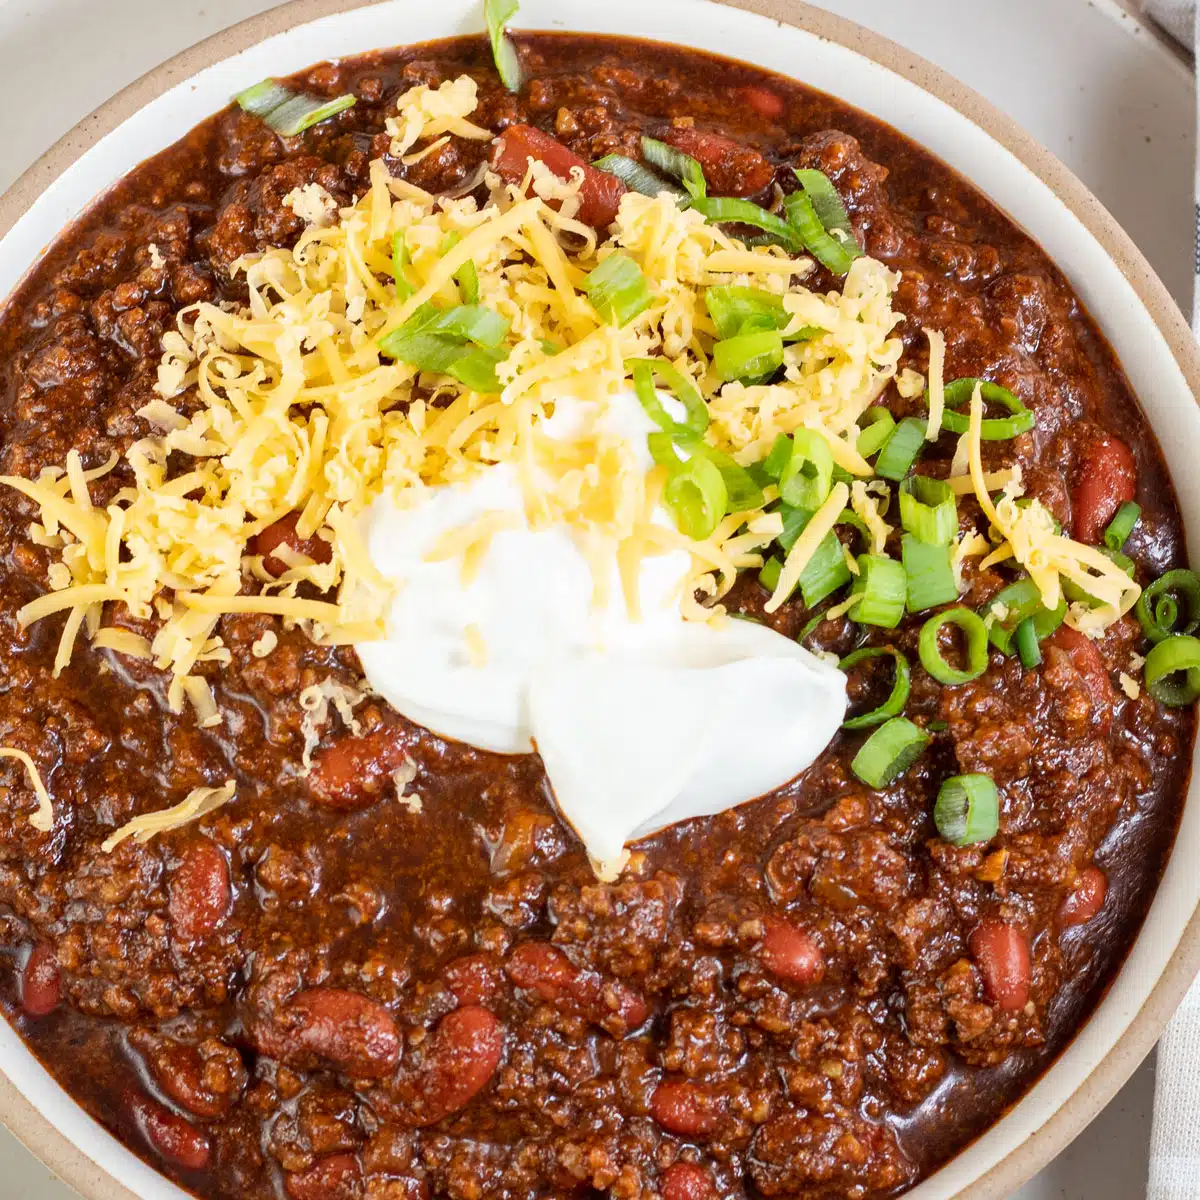 Square image of Dutch oven chili in a bowl with grated cheddar cheese and sour cream on top.